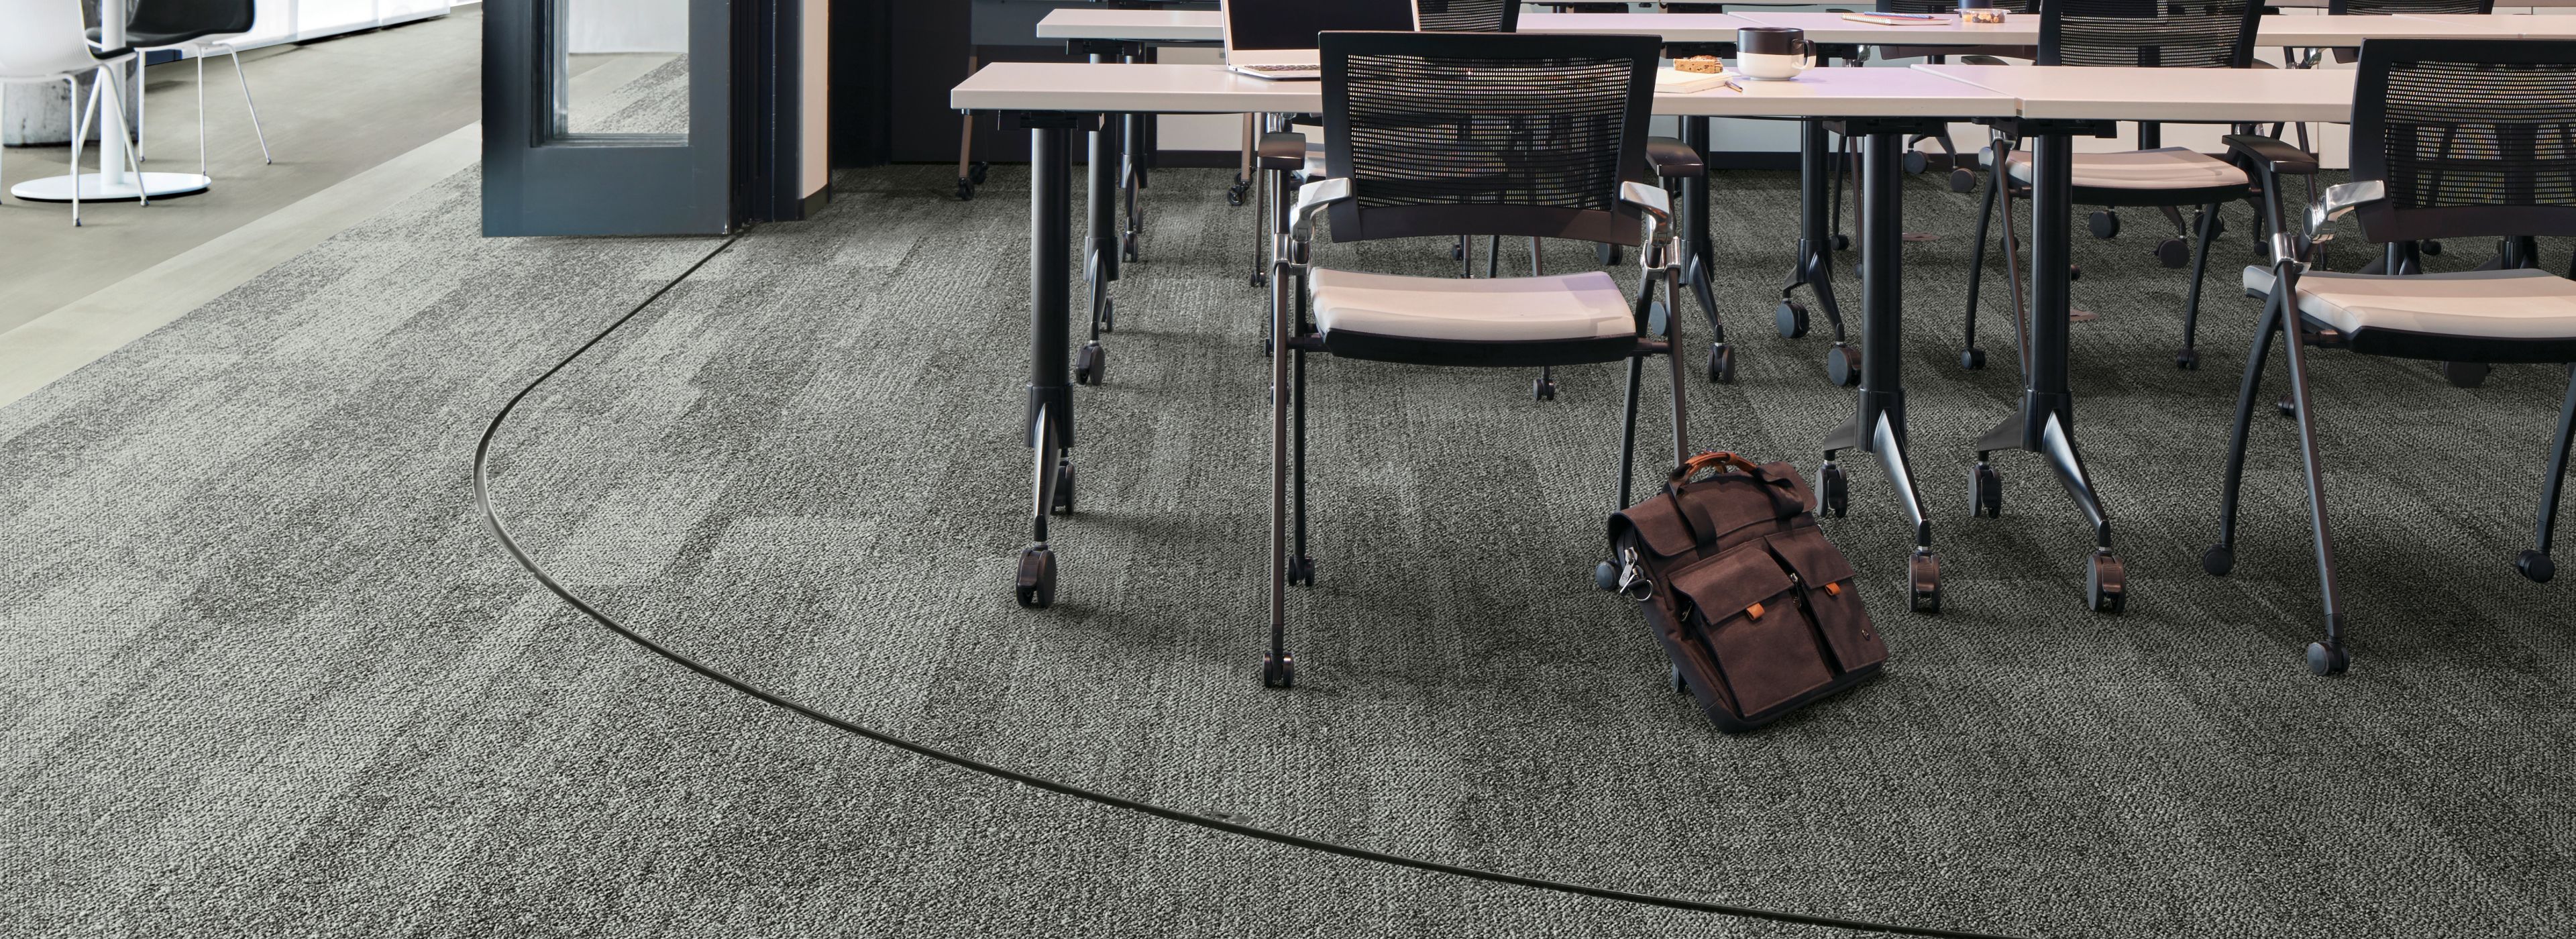 Interface Open Air 410 plank carpet tile in open conference room with satchel leaning on chair numéro d’image 1